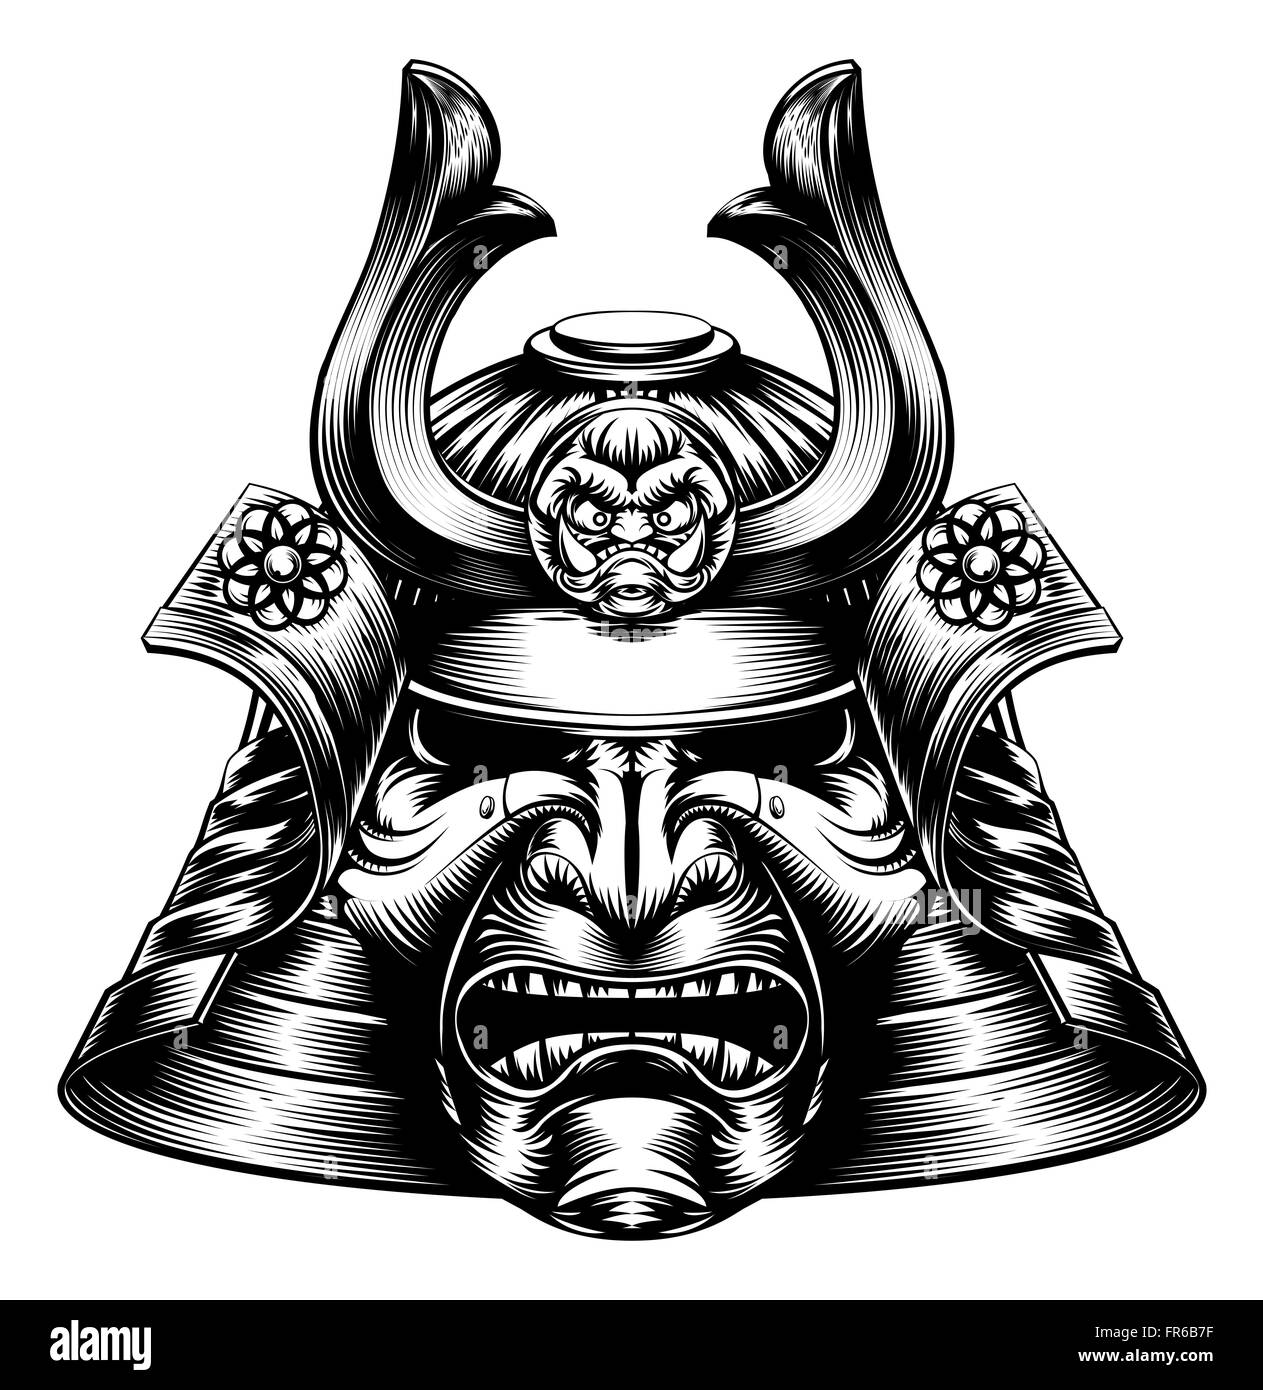 A Japanese samurai mask and helmet in a woodcut style Stock Photo - Alamy